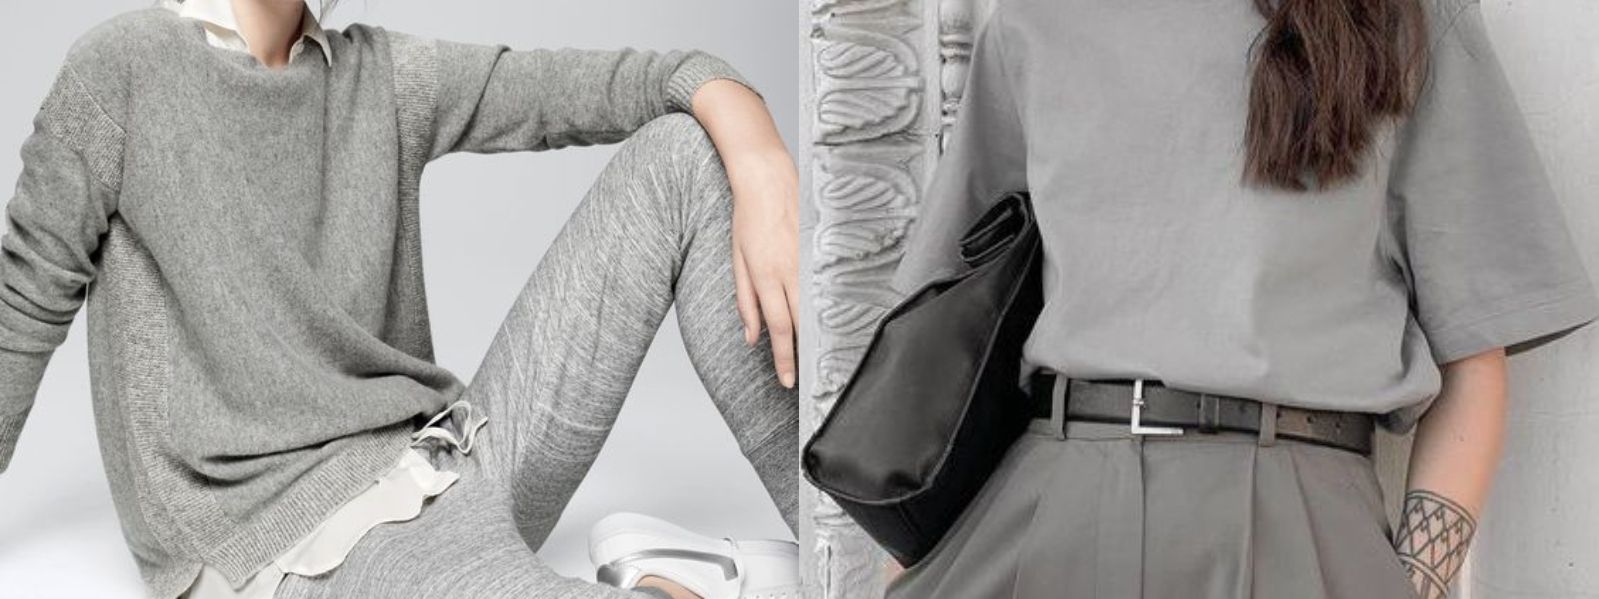 images easyblog articles 740 grey outfit 4086fc34